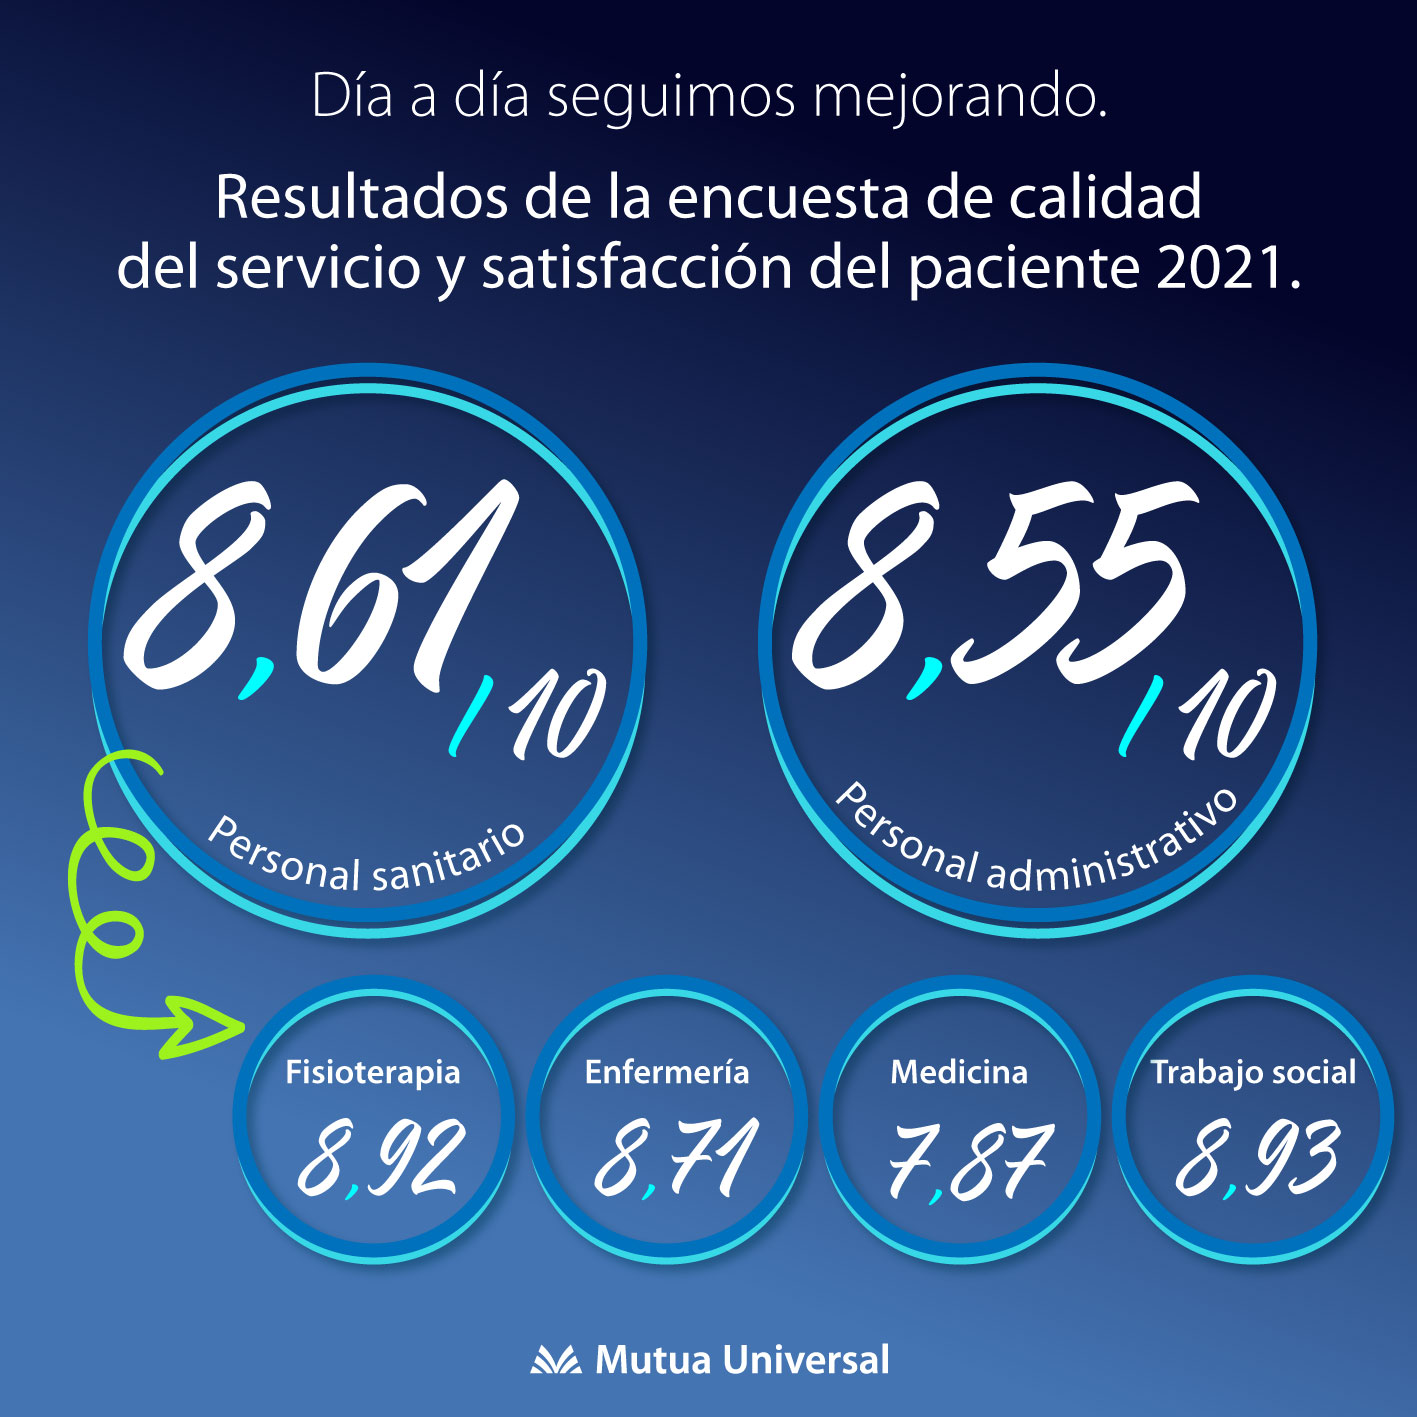 Our health staff obtains about 8.61 in the Satisfaction survey Patient 2021